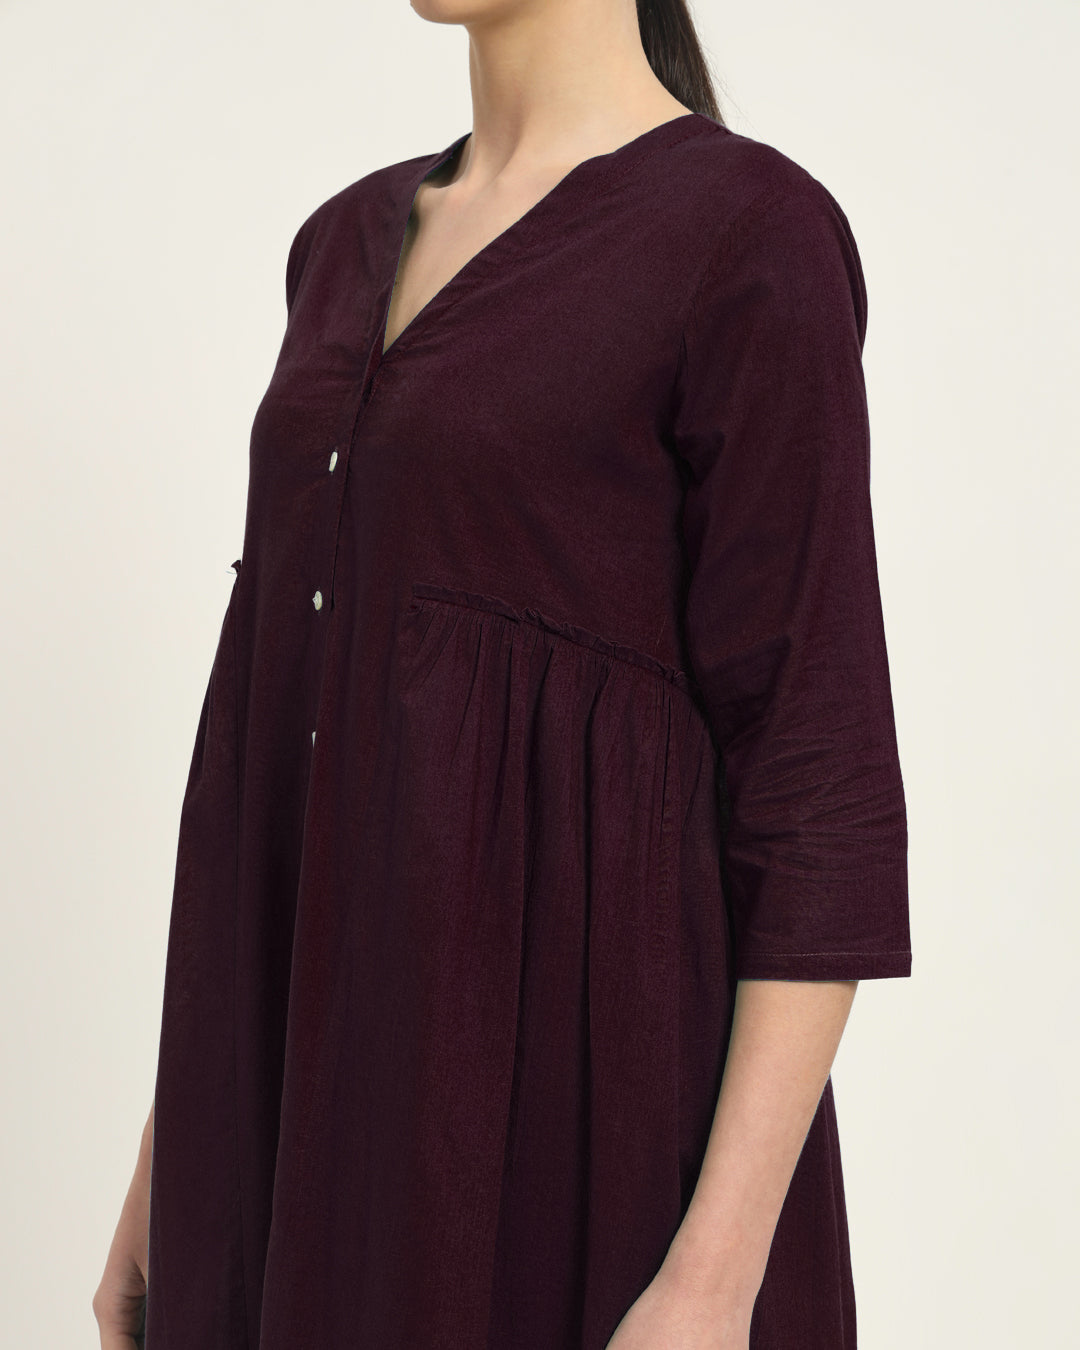 Plum Passion Whimsy Affair Buttoned Solid Kurta (Without Bottoms)